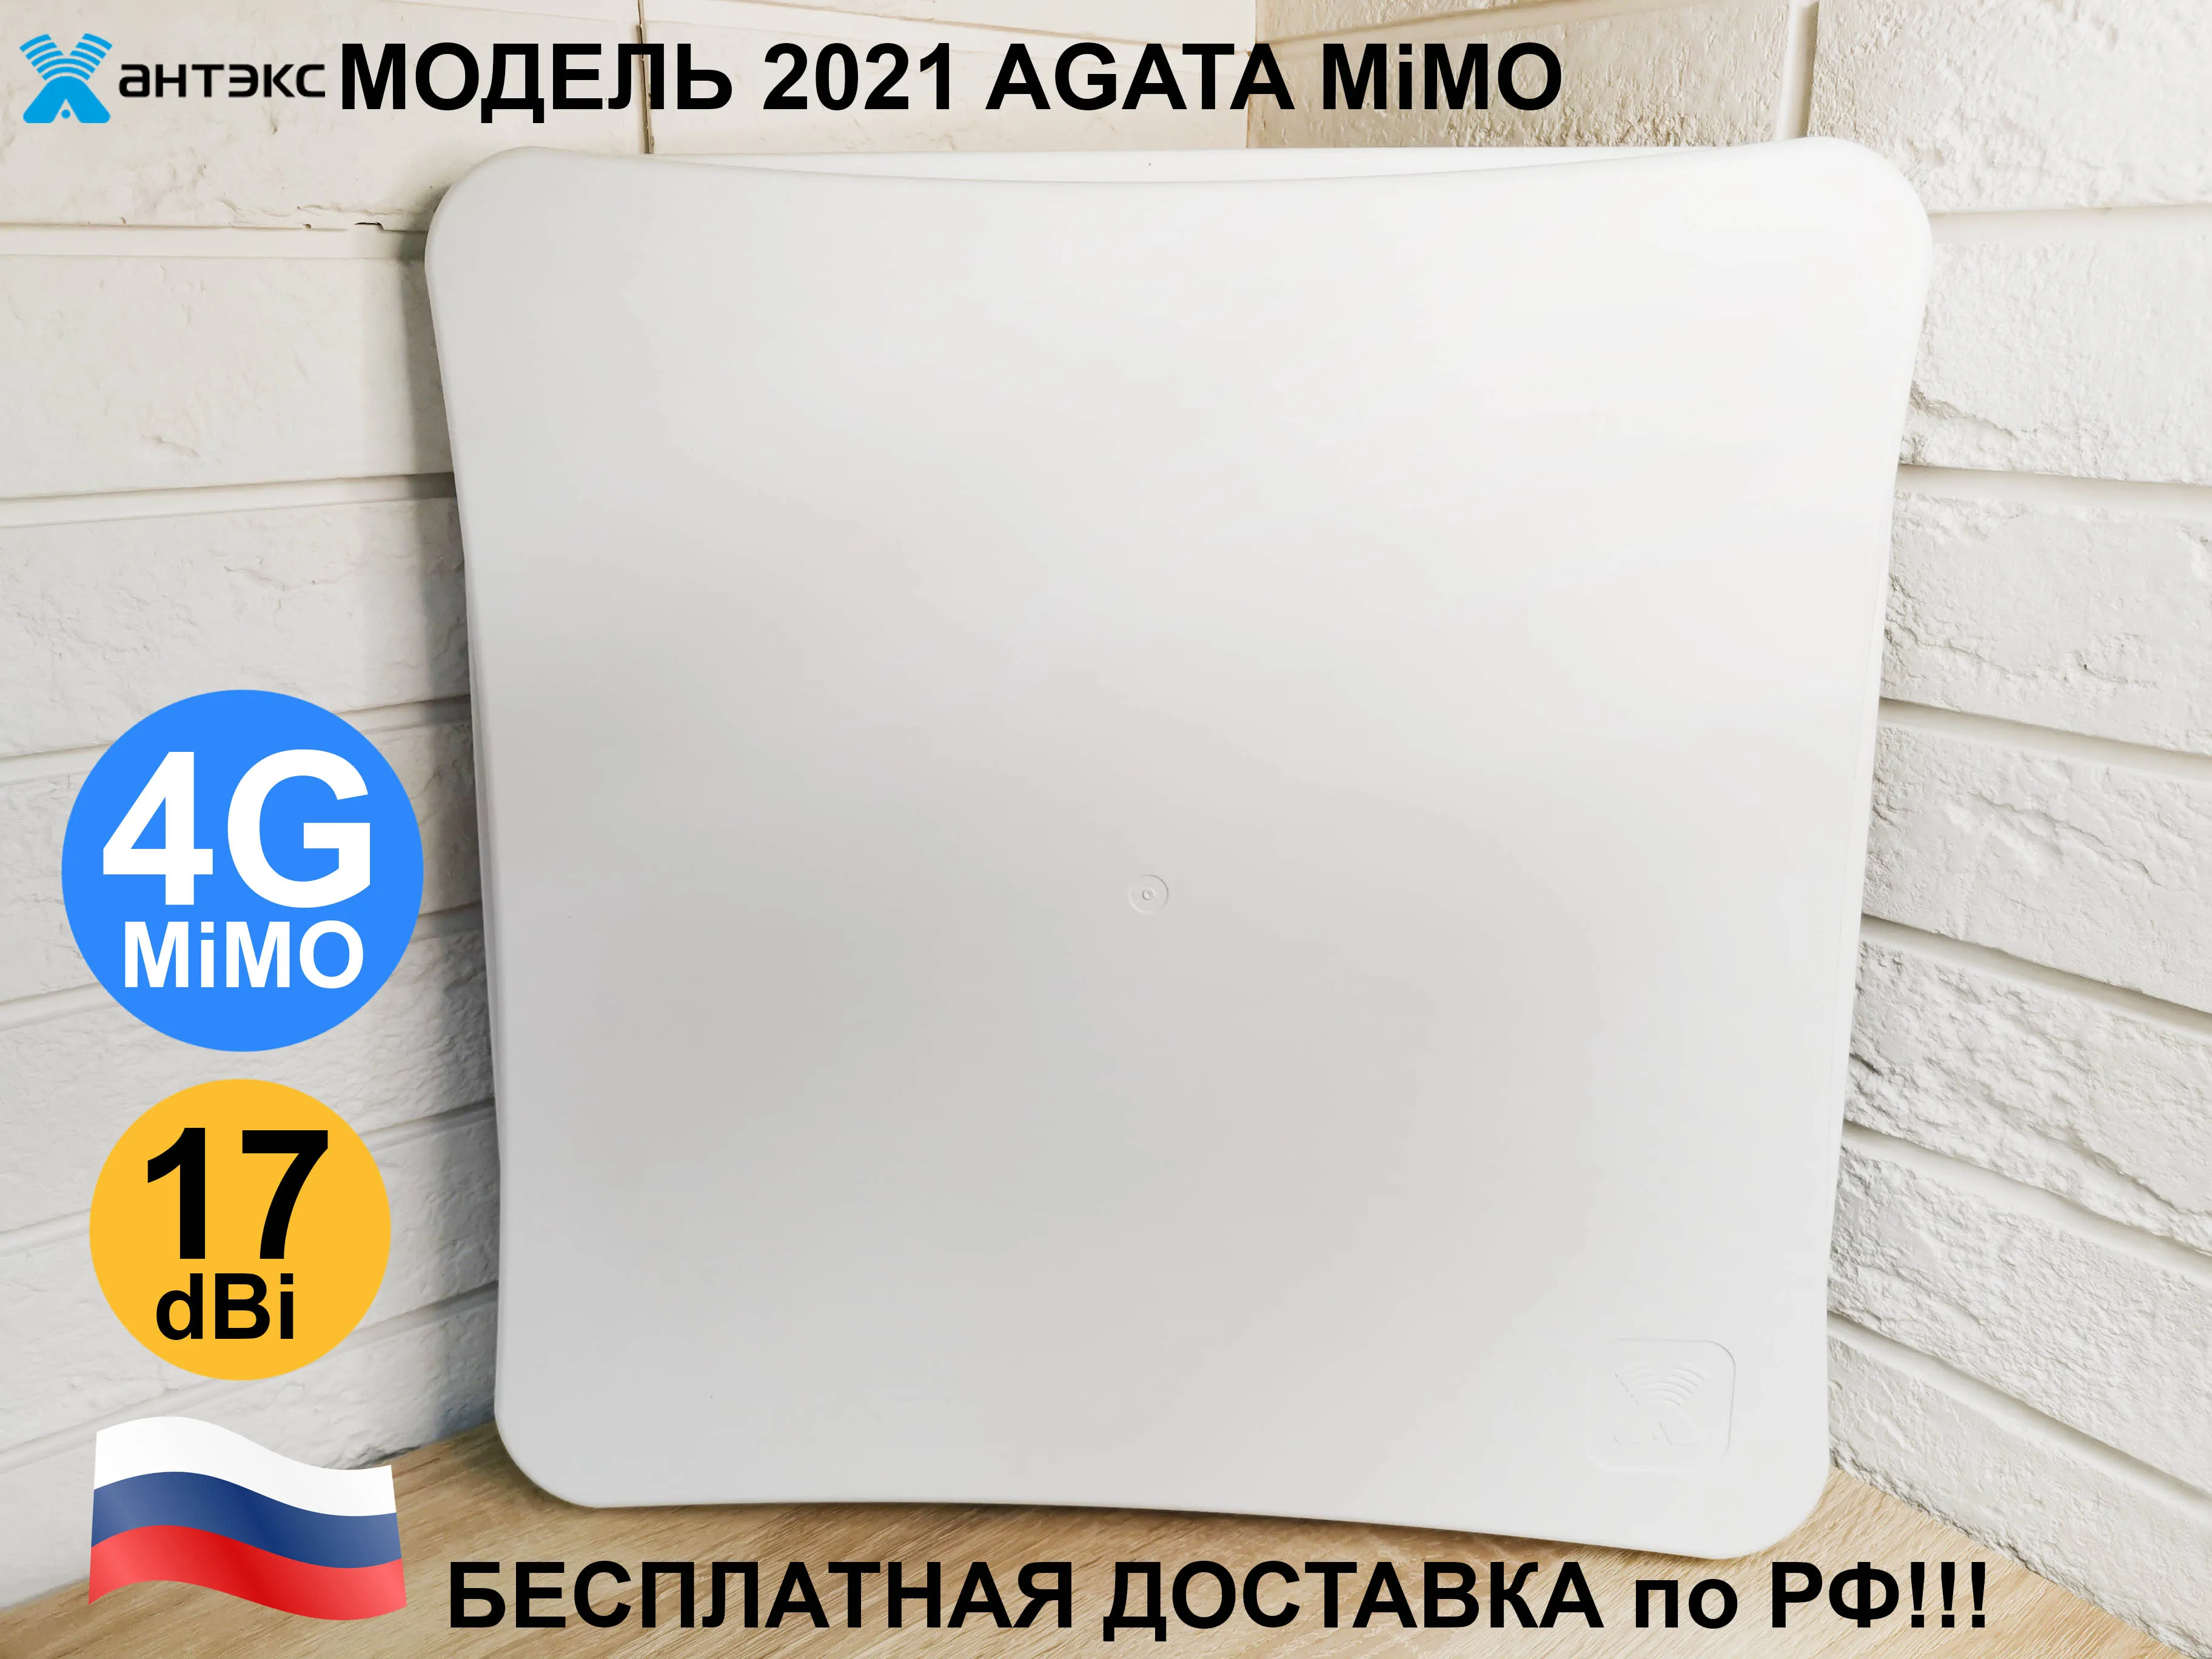 Powerful antenna to gain 3G \ 4G modem signal model 2021 Agata MIMO LTE new for Huawei and ZTE 4G modem and router